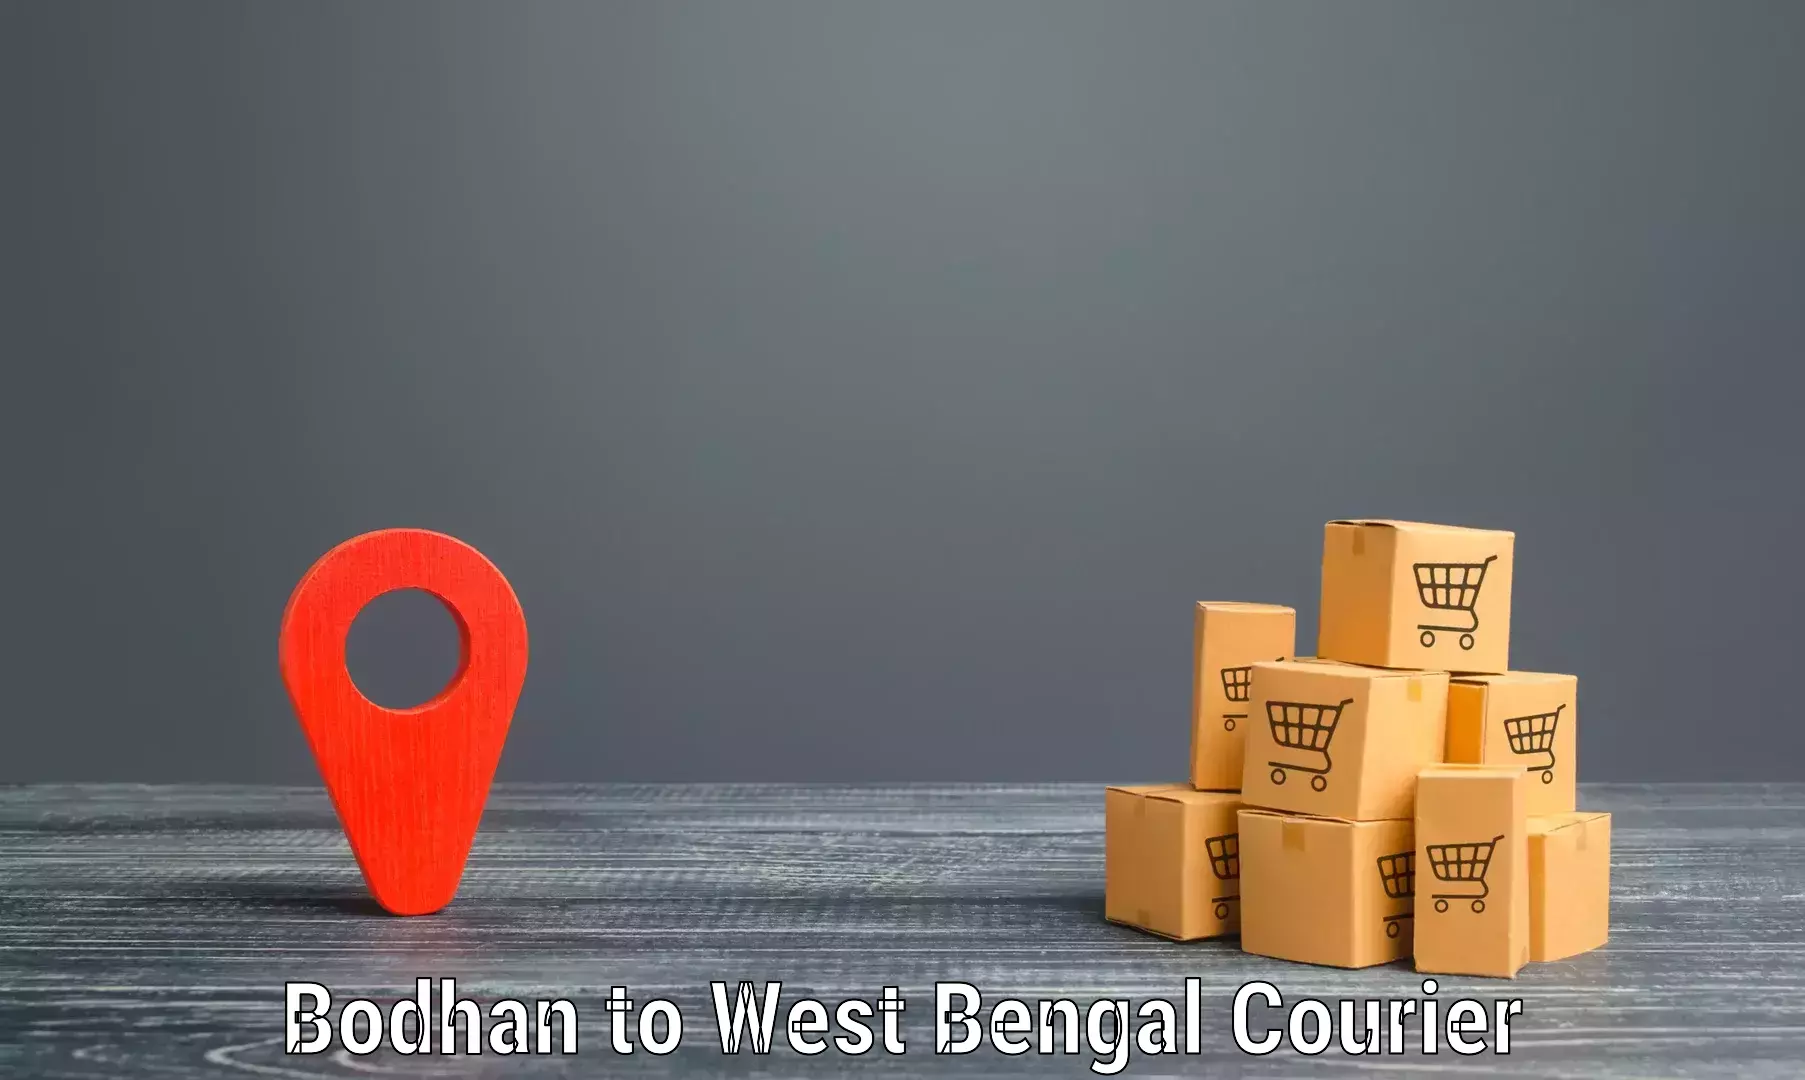 Courier service comparison Bodhan to West Bengal